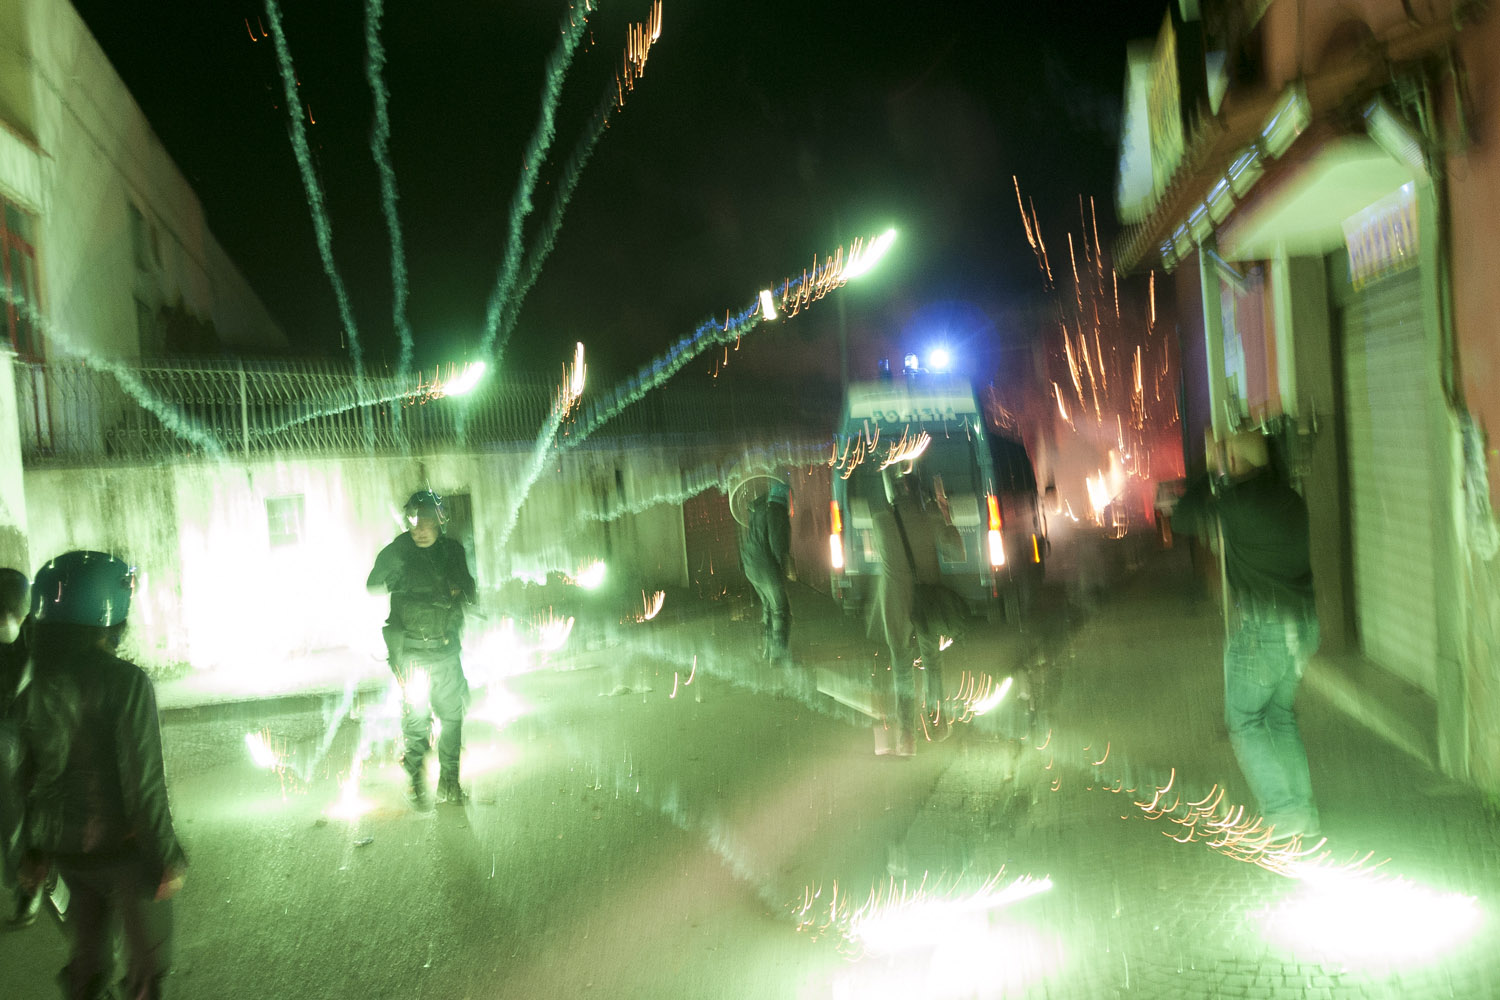 Police forces attempting to enter the village of Boscoreale, in order to secure the perimeter of the “roundabout”, are met with fireworks in the narrow alleys of the village. When charges were pressed against many activists, the indictment included several local residents in their seventies, with one accused of having thrown a piece of furniture on police, from the balcony.